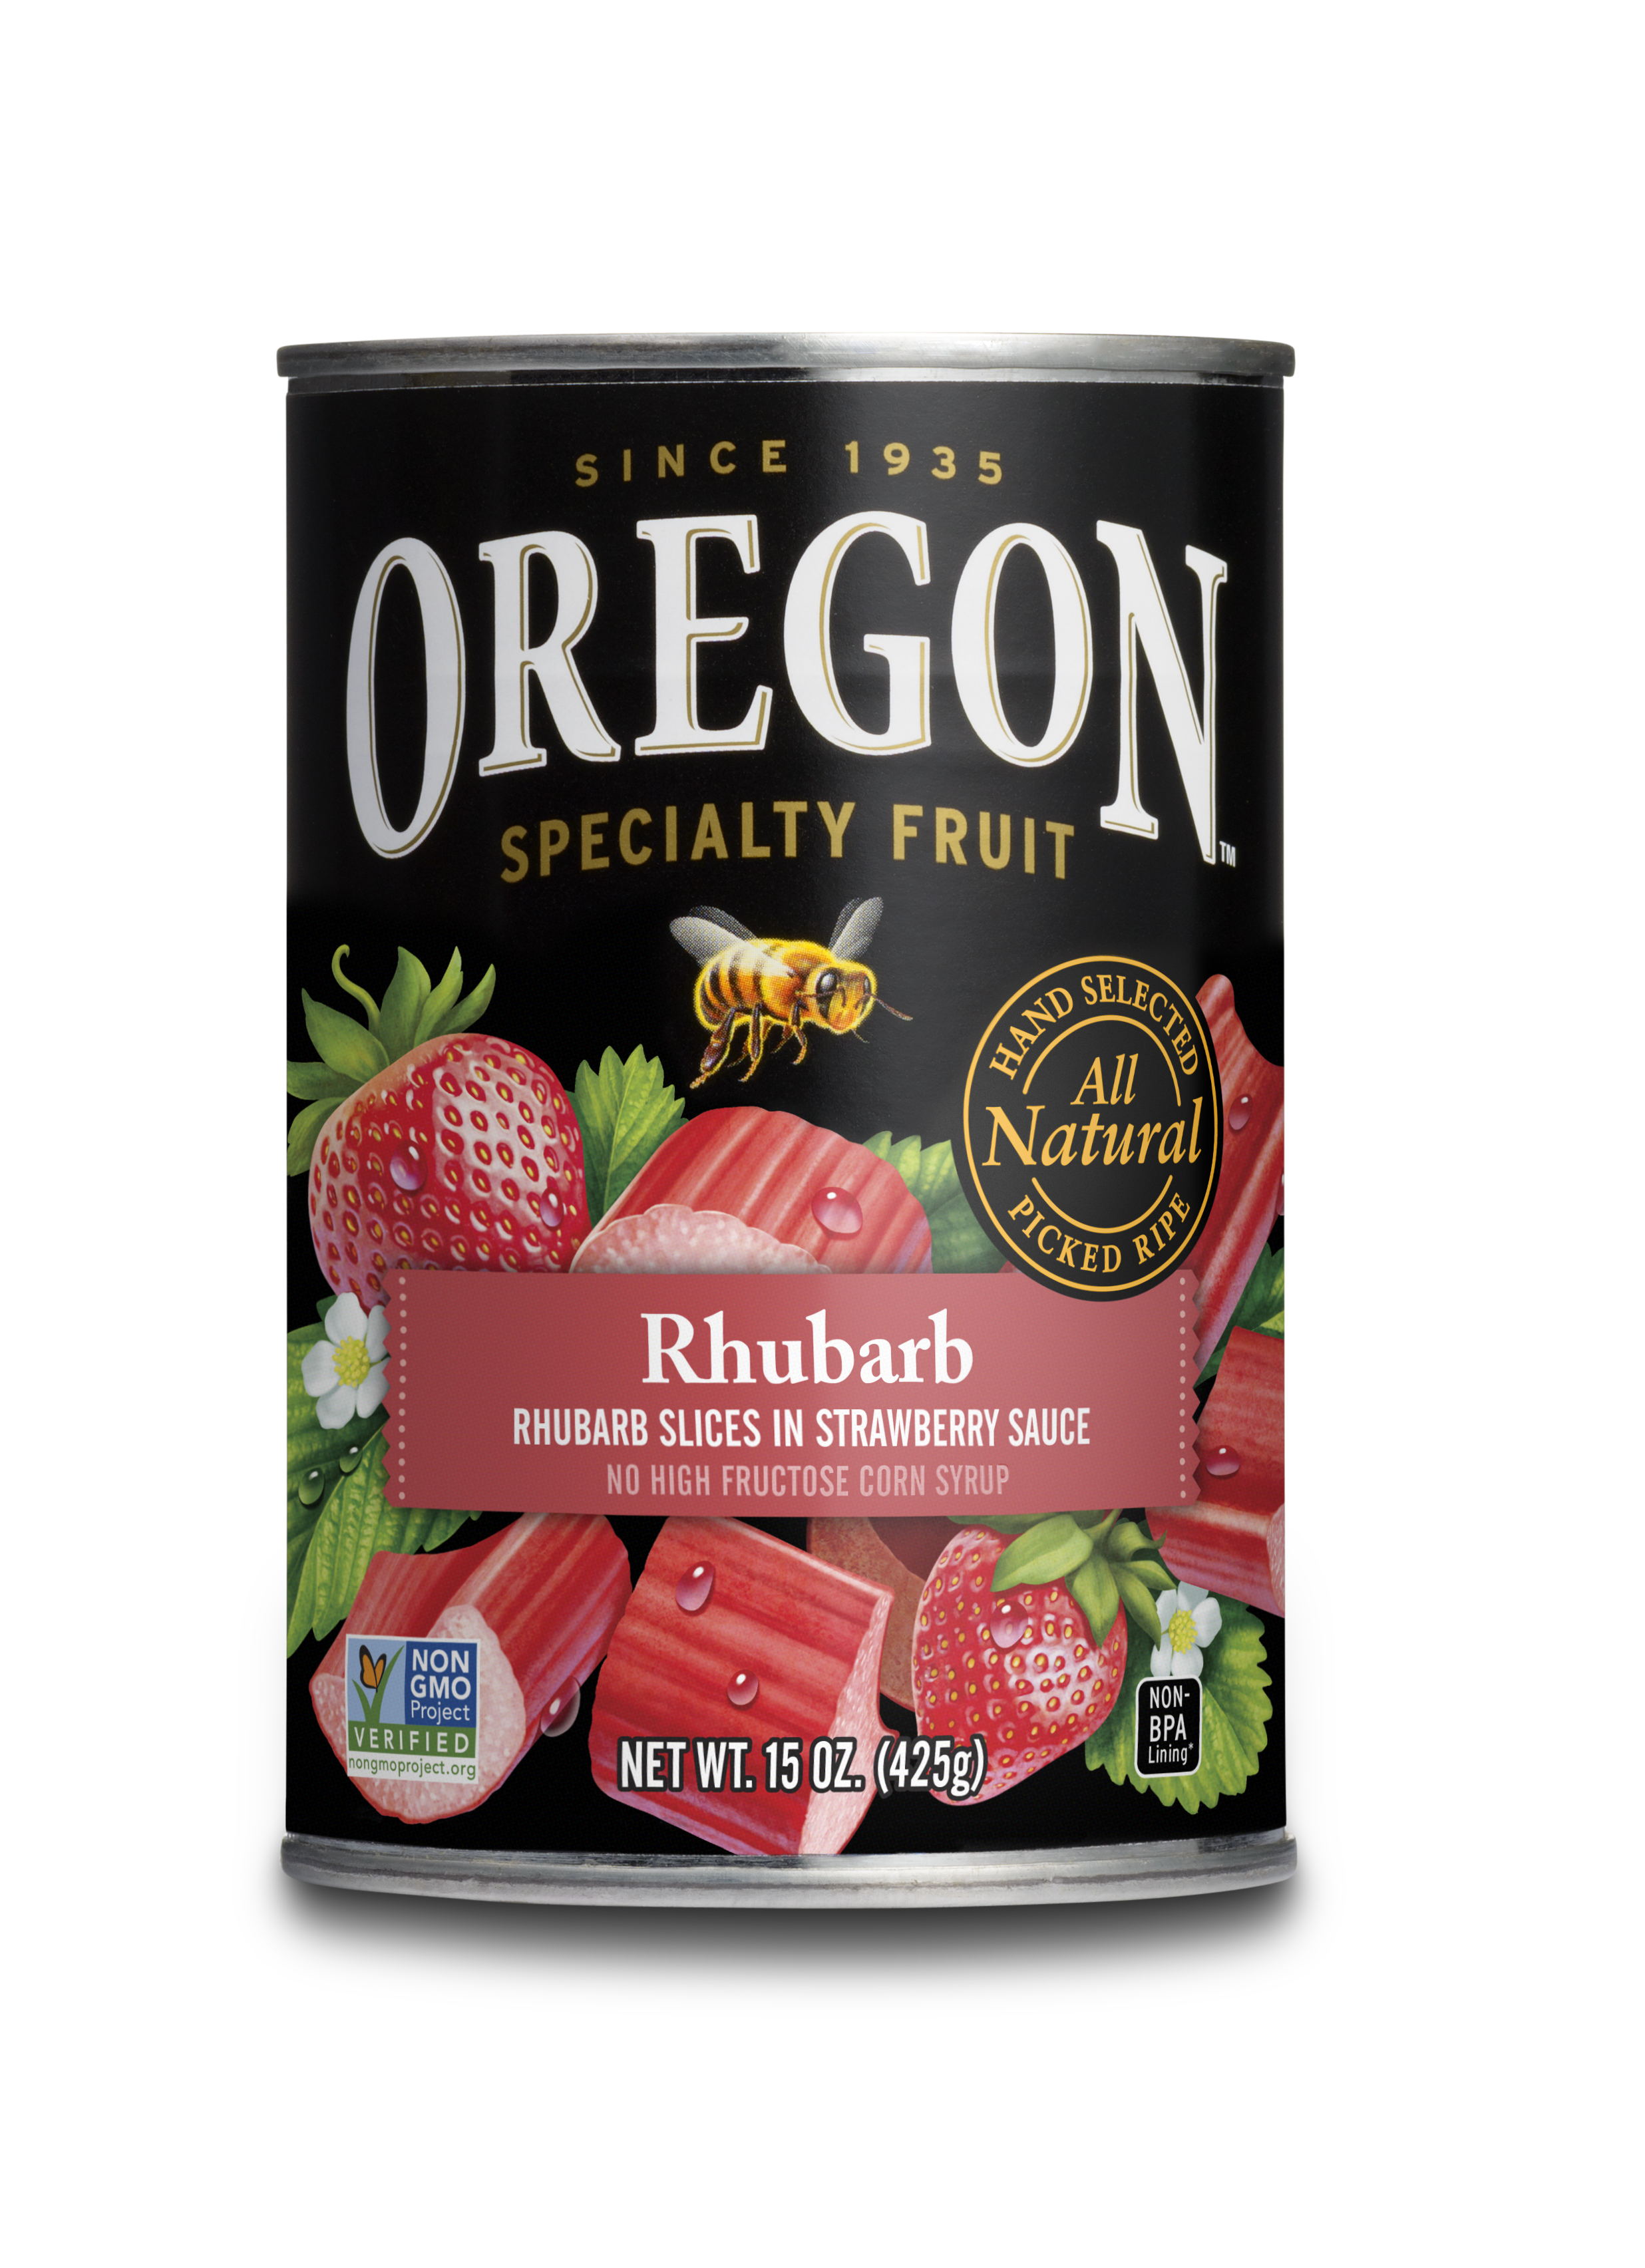 New Oregon Fruit Products’ Rhubarb in Strawberry Sauce Combines ...